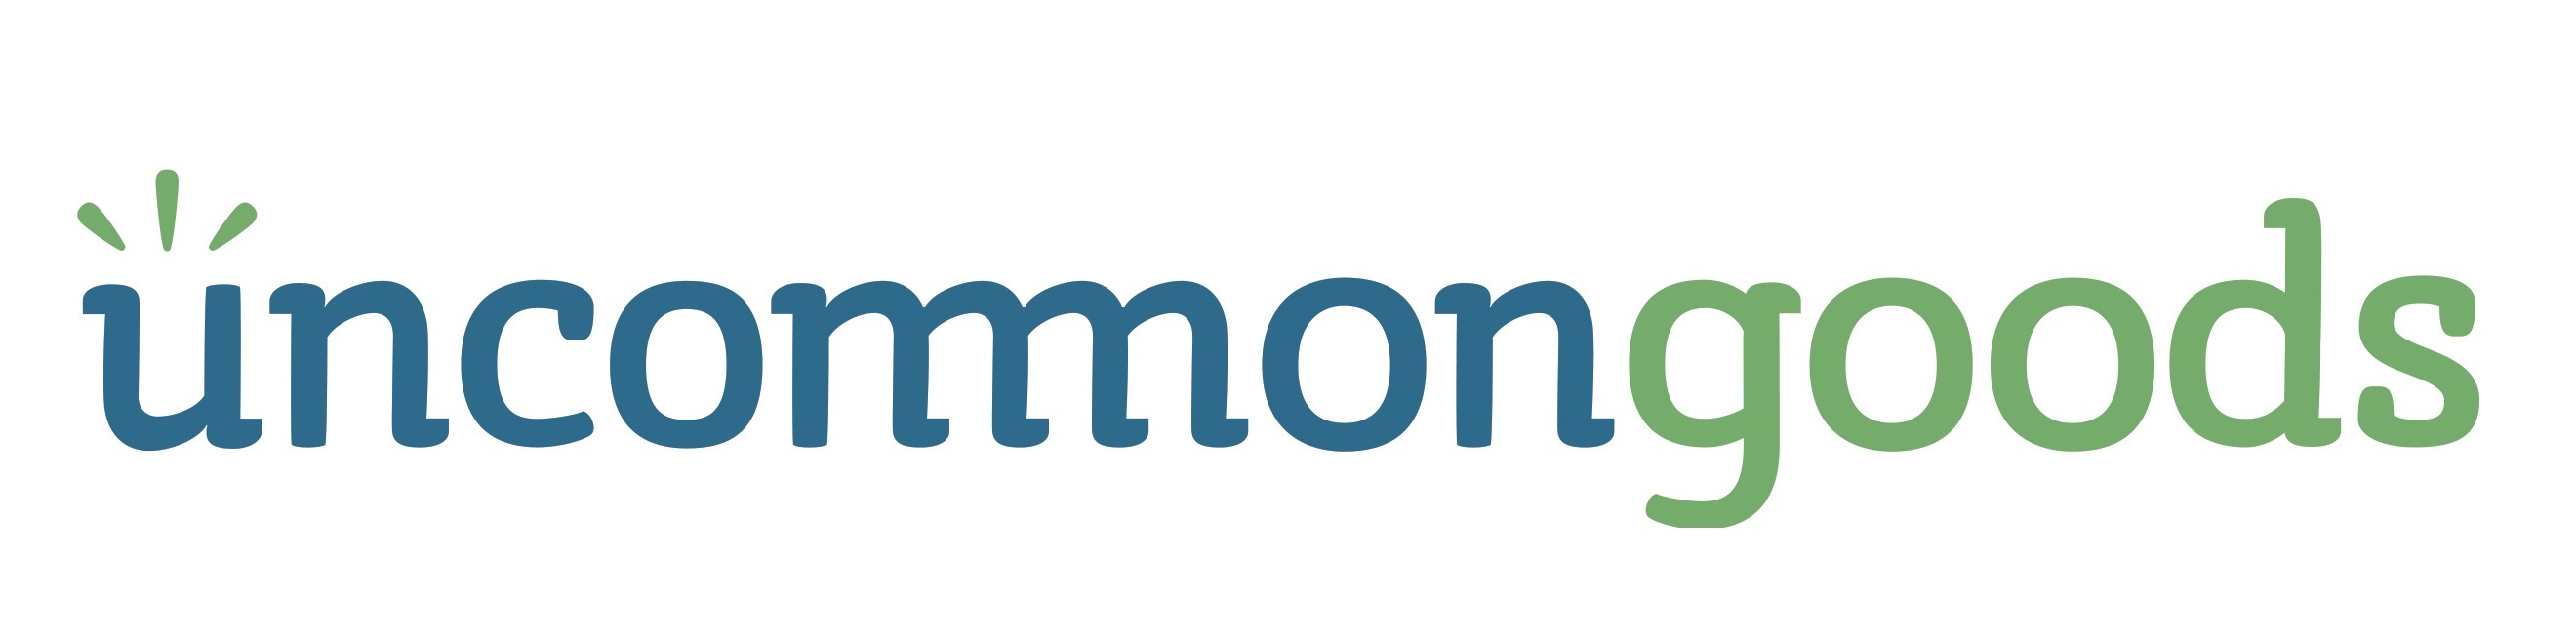 uncommongoods-logo-color